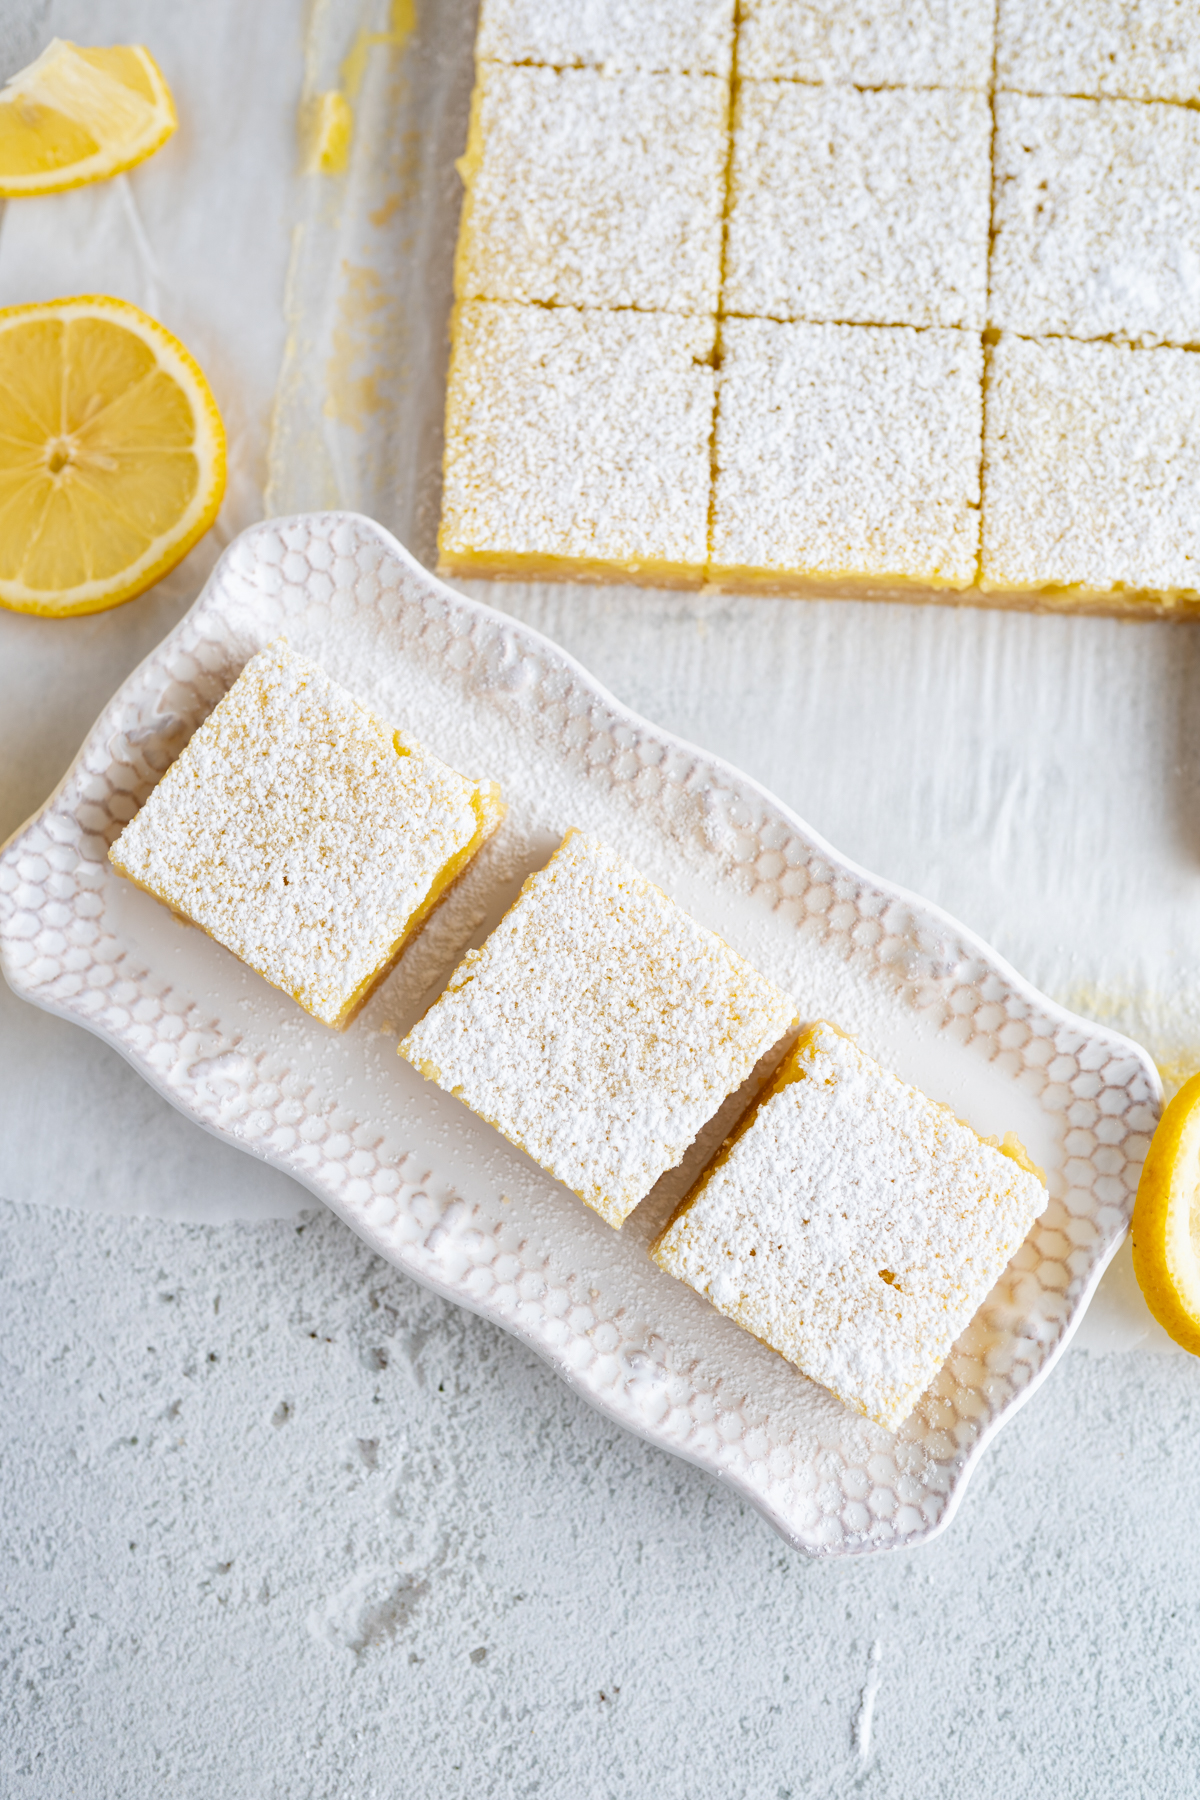 Aerial view of 3 lemon squares on a platter next to a grid of bars.